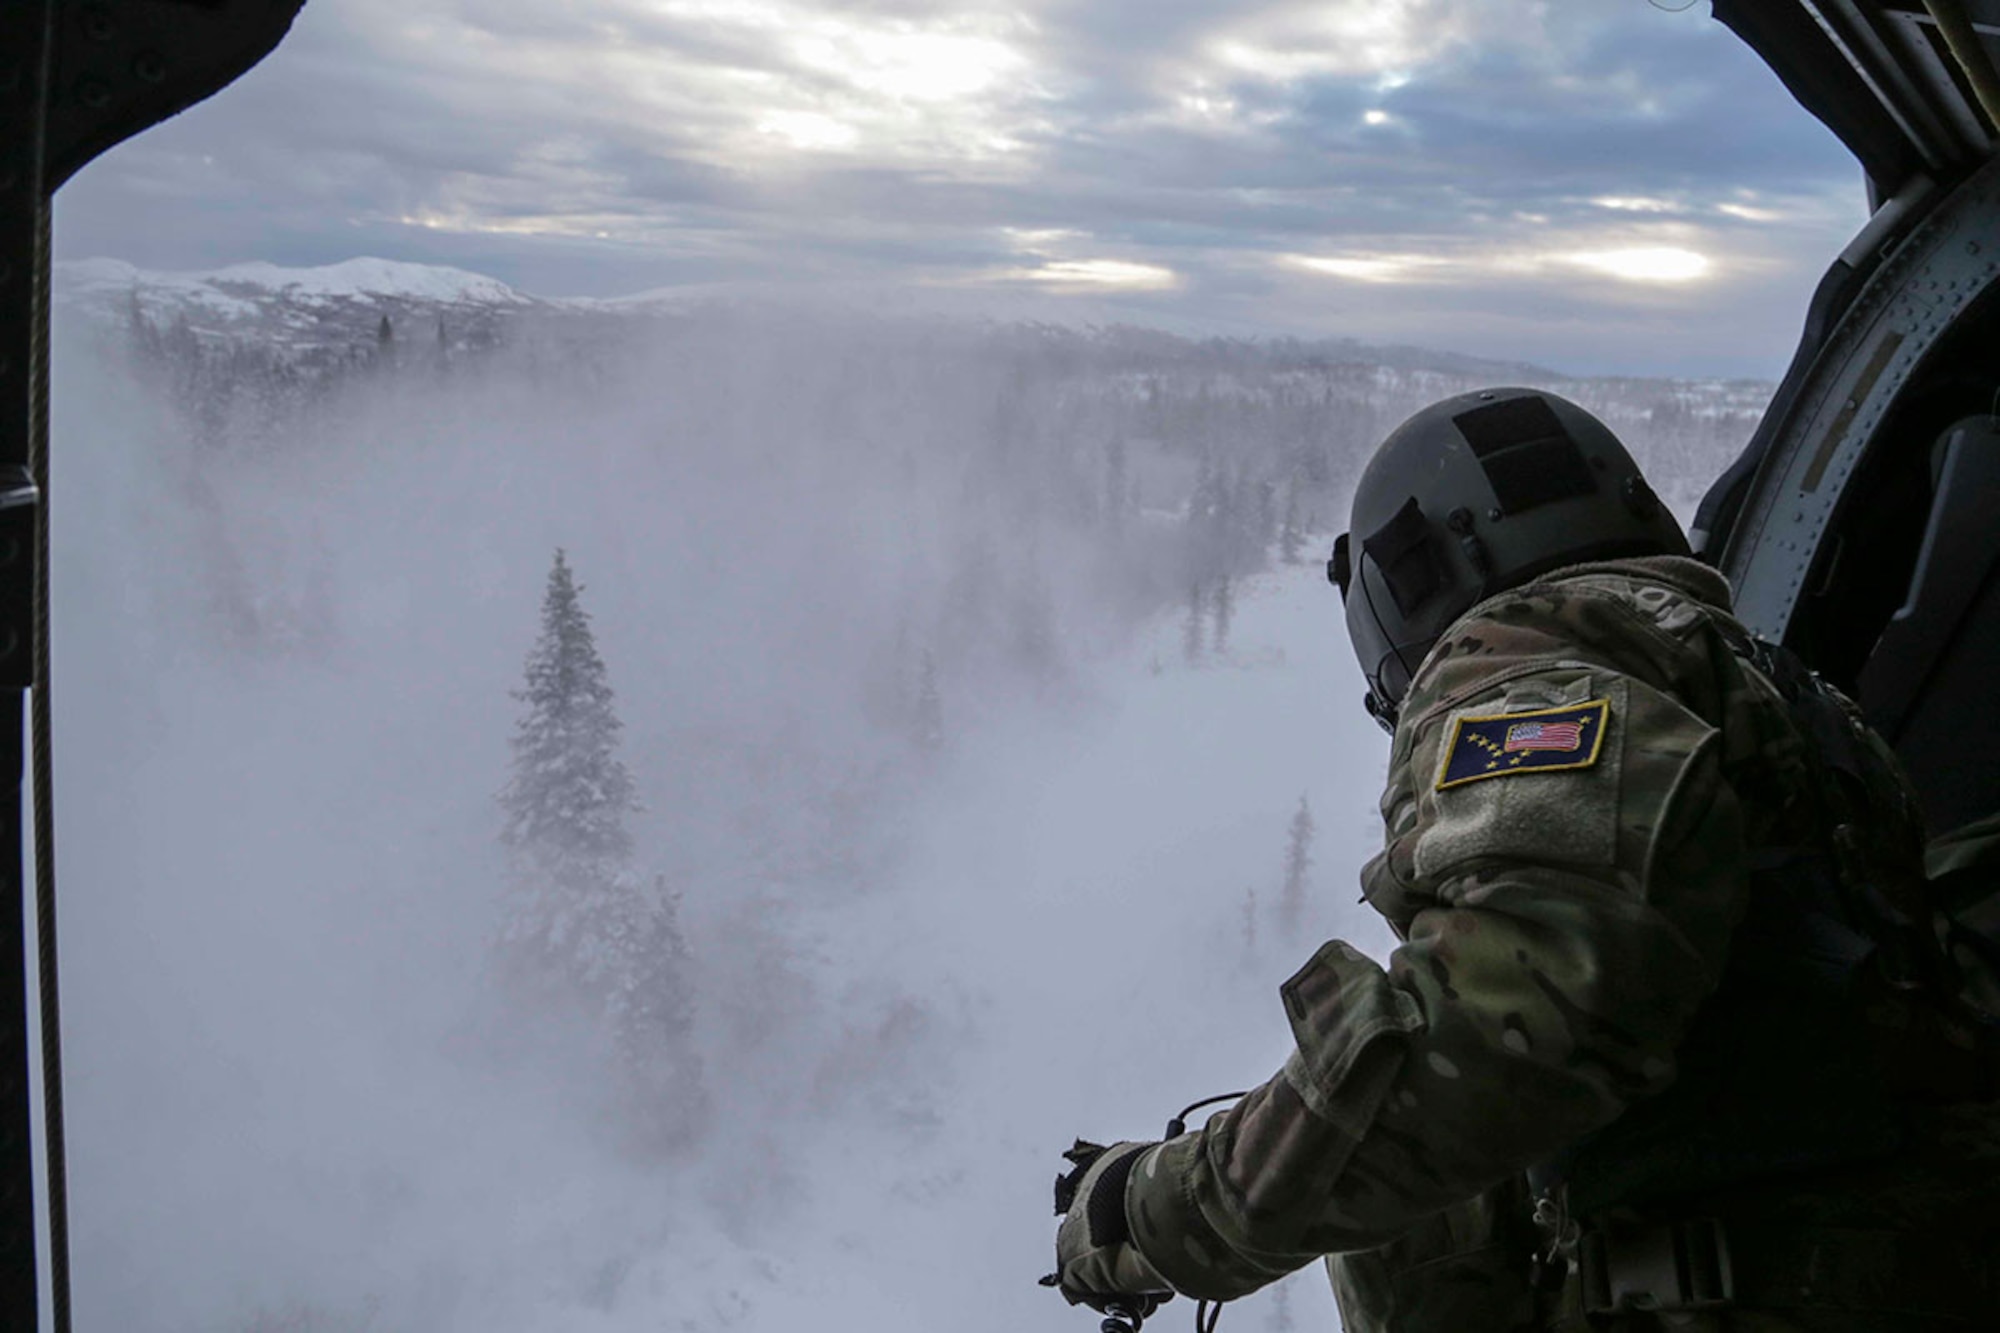 Alaska Air National Guard Staff Sgt. Jheren Svoboda, a flight engineer with the 210th Rescue Squadron, prepares to hoist a combat rescue officer out of an HH-60 Pave Hawk helicopter during a training mission near Mount Susitna Dec. 16, 2014. (U.S. Army National Guard photo/Sgt. Balinda O’Neal)